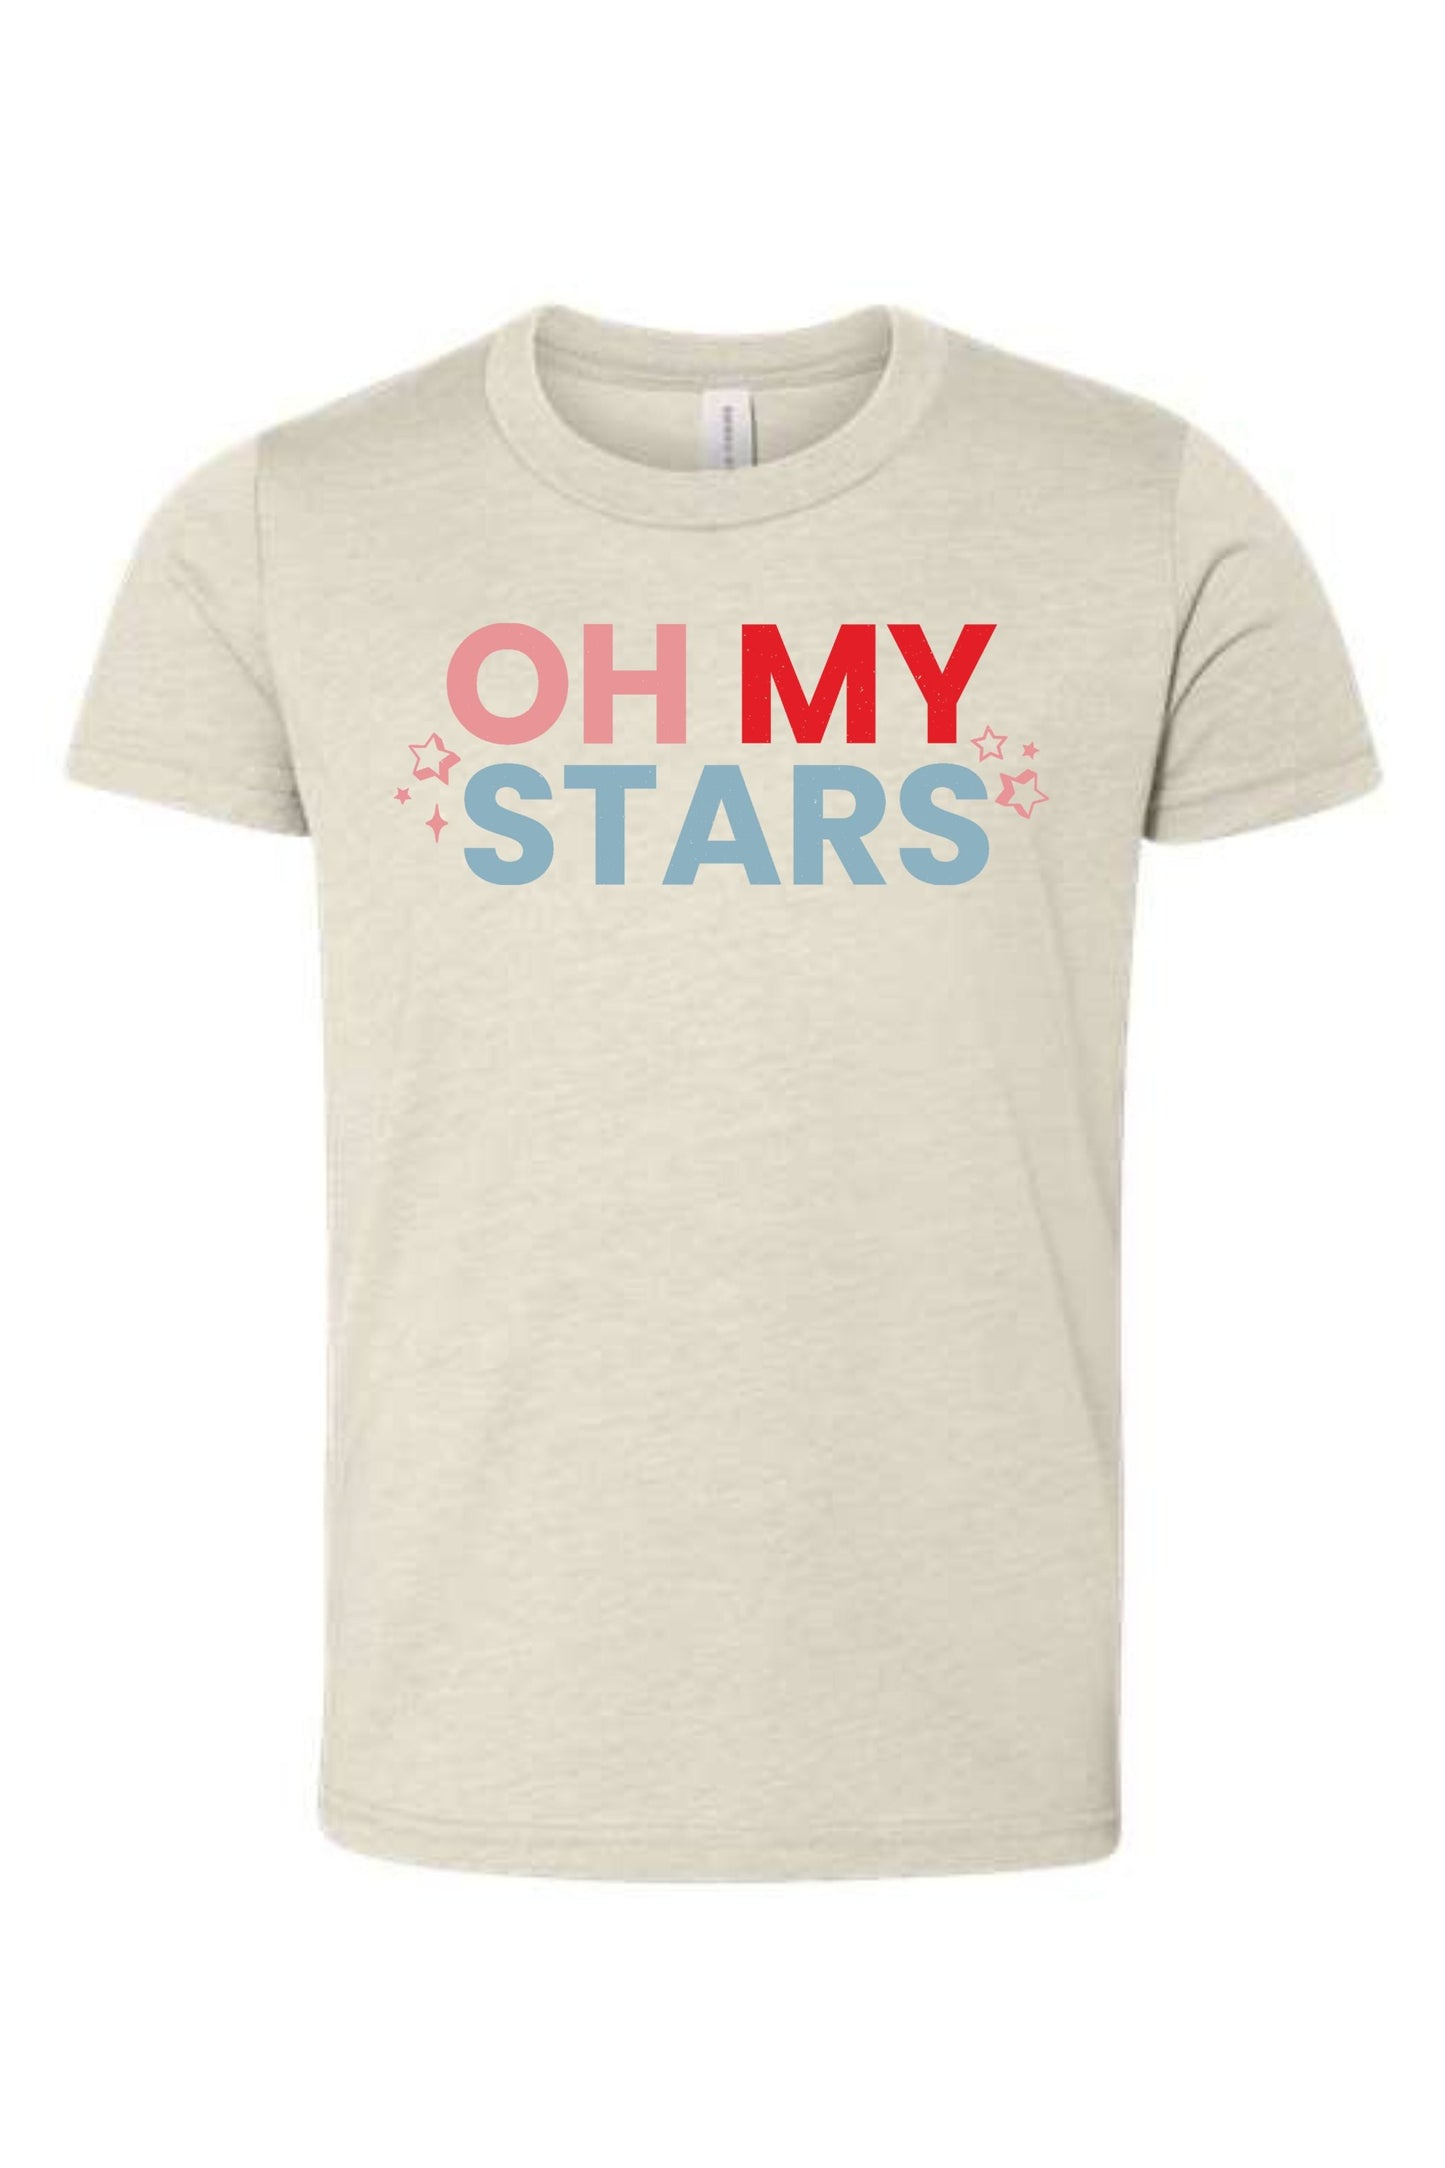 Oh My Stars | Kids Tee | RTS-Kids Tees-Sister Shirts-Sister Shirts, Cute & Custom Tees for Mama & Littles in Trussville, Alabama.